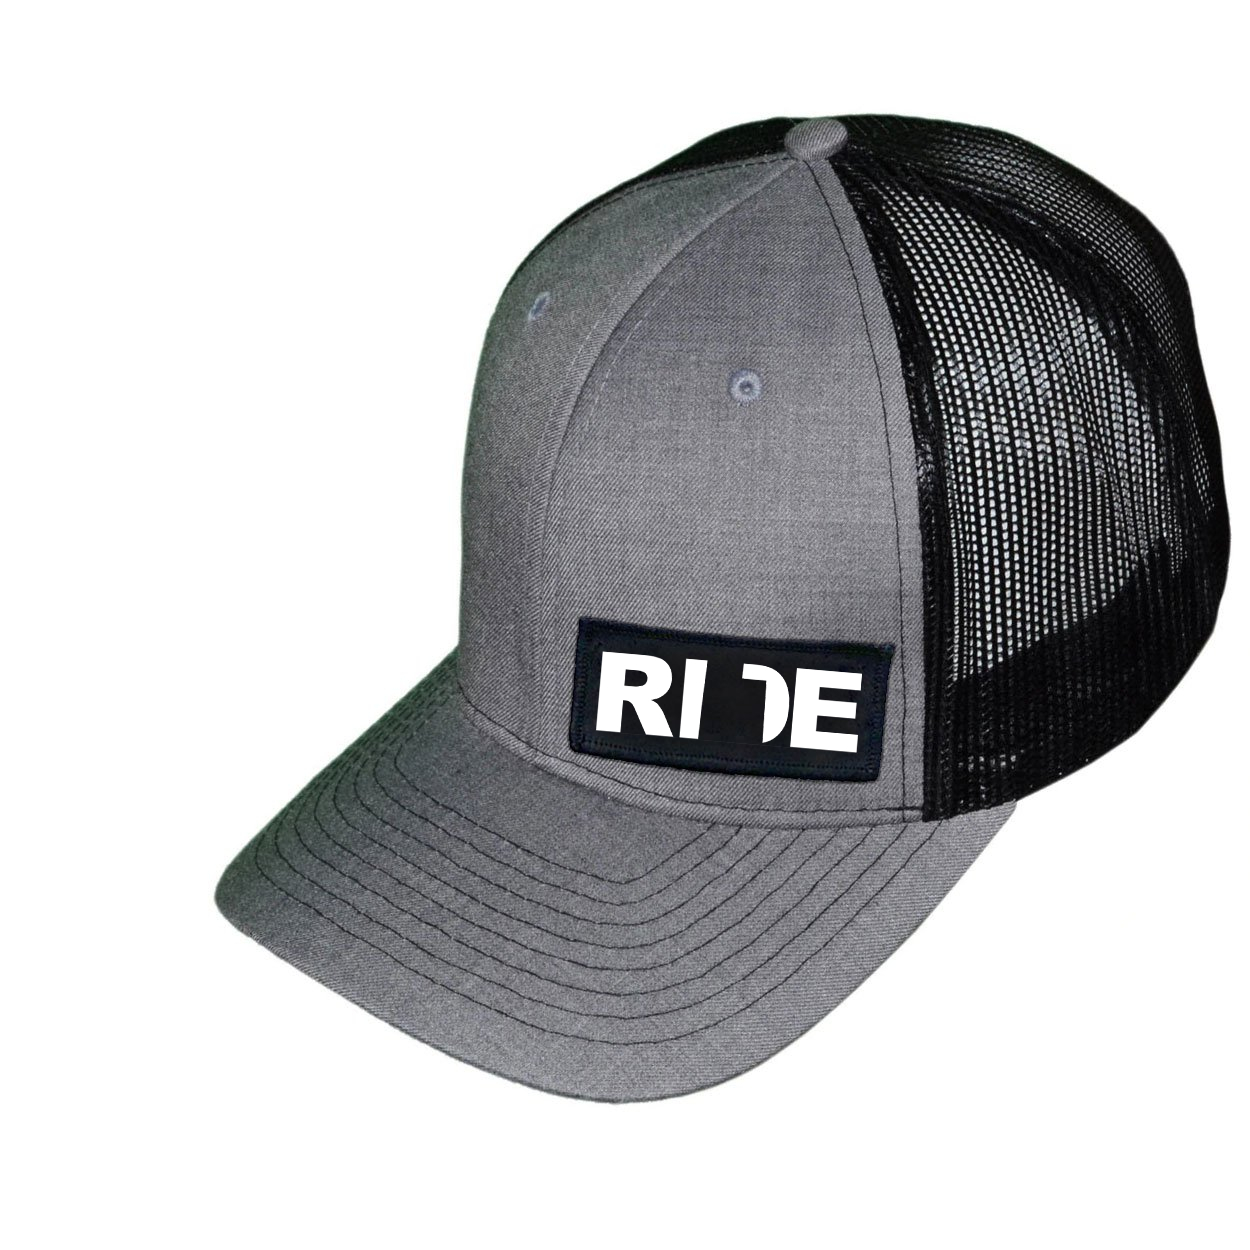 Ride Utah Night Out Pro Embroidered Snapback Trucker Hat Heather Gray/Black